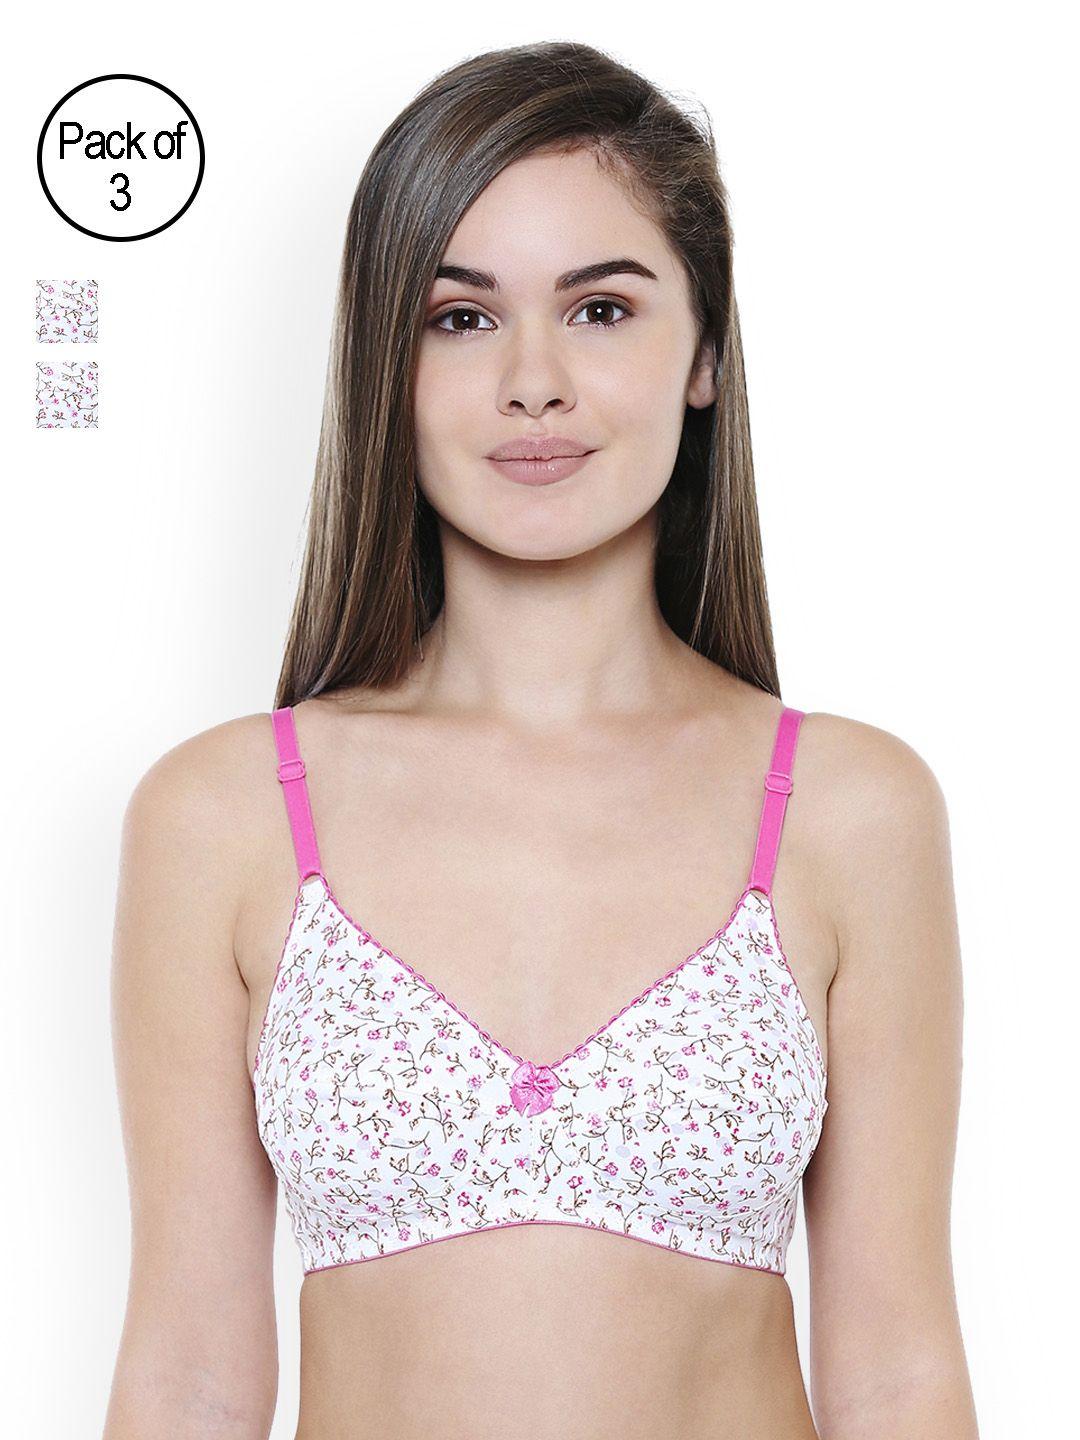 bodycare-pack-of-3-off-white-floral-print-bras-e1553www